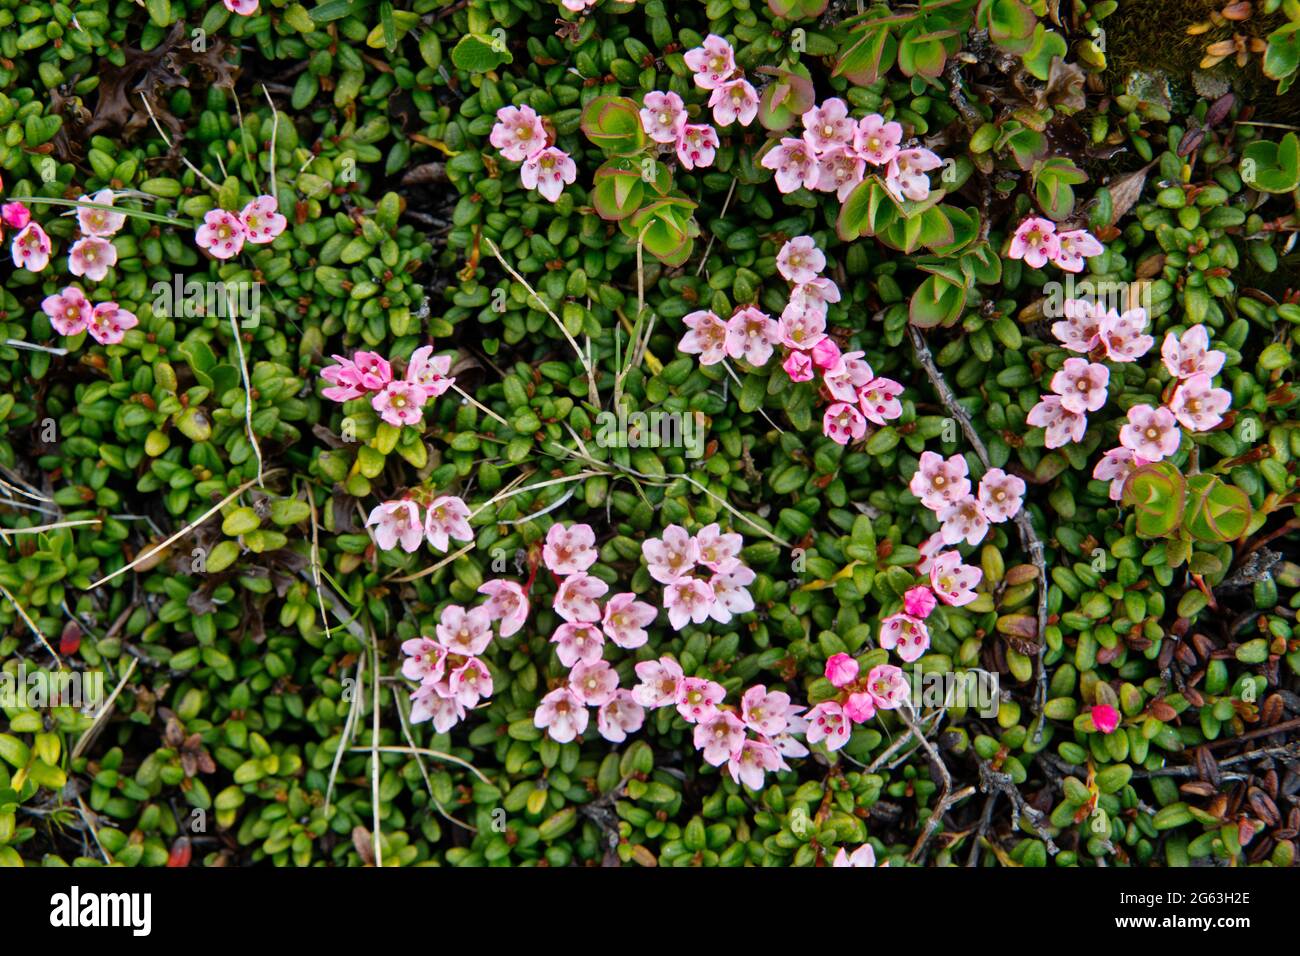 Small pink flowers and leathery green leaves of Alpine azalea Stock Photo